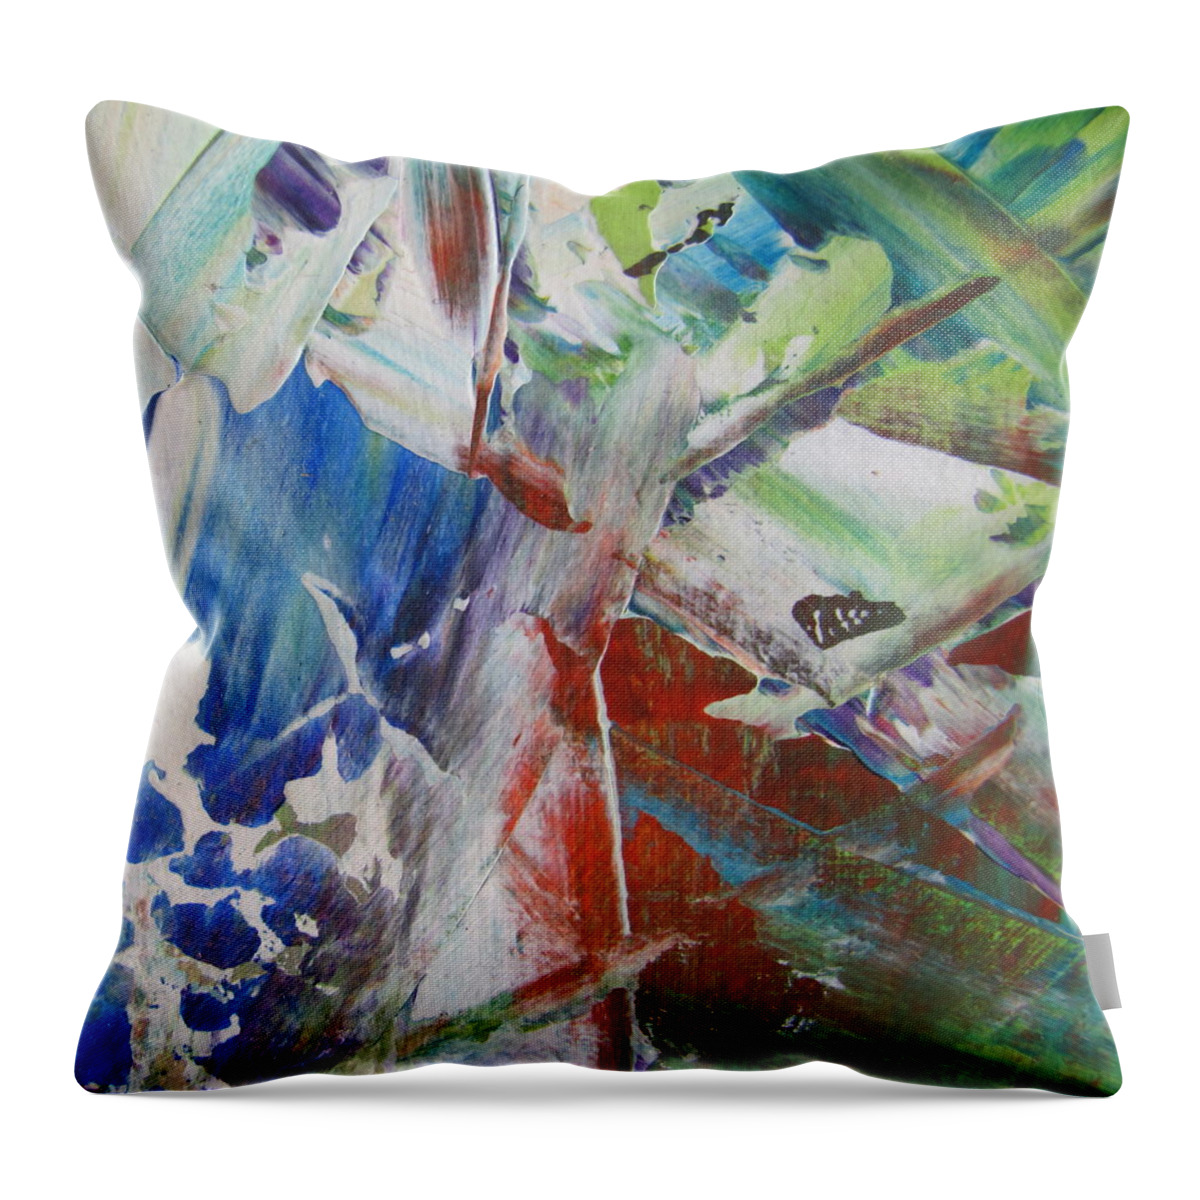 Painting Throw Pillow featuring the painting Garden Abstract 3 by Anita Burgermeister